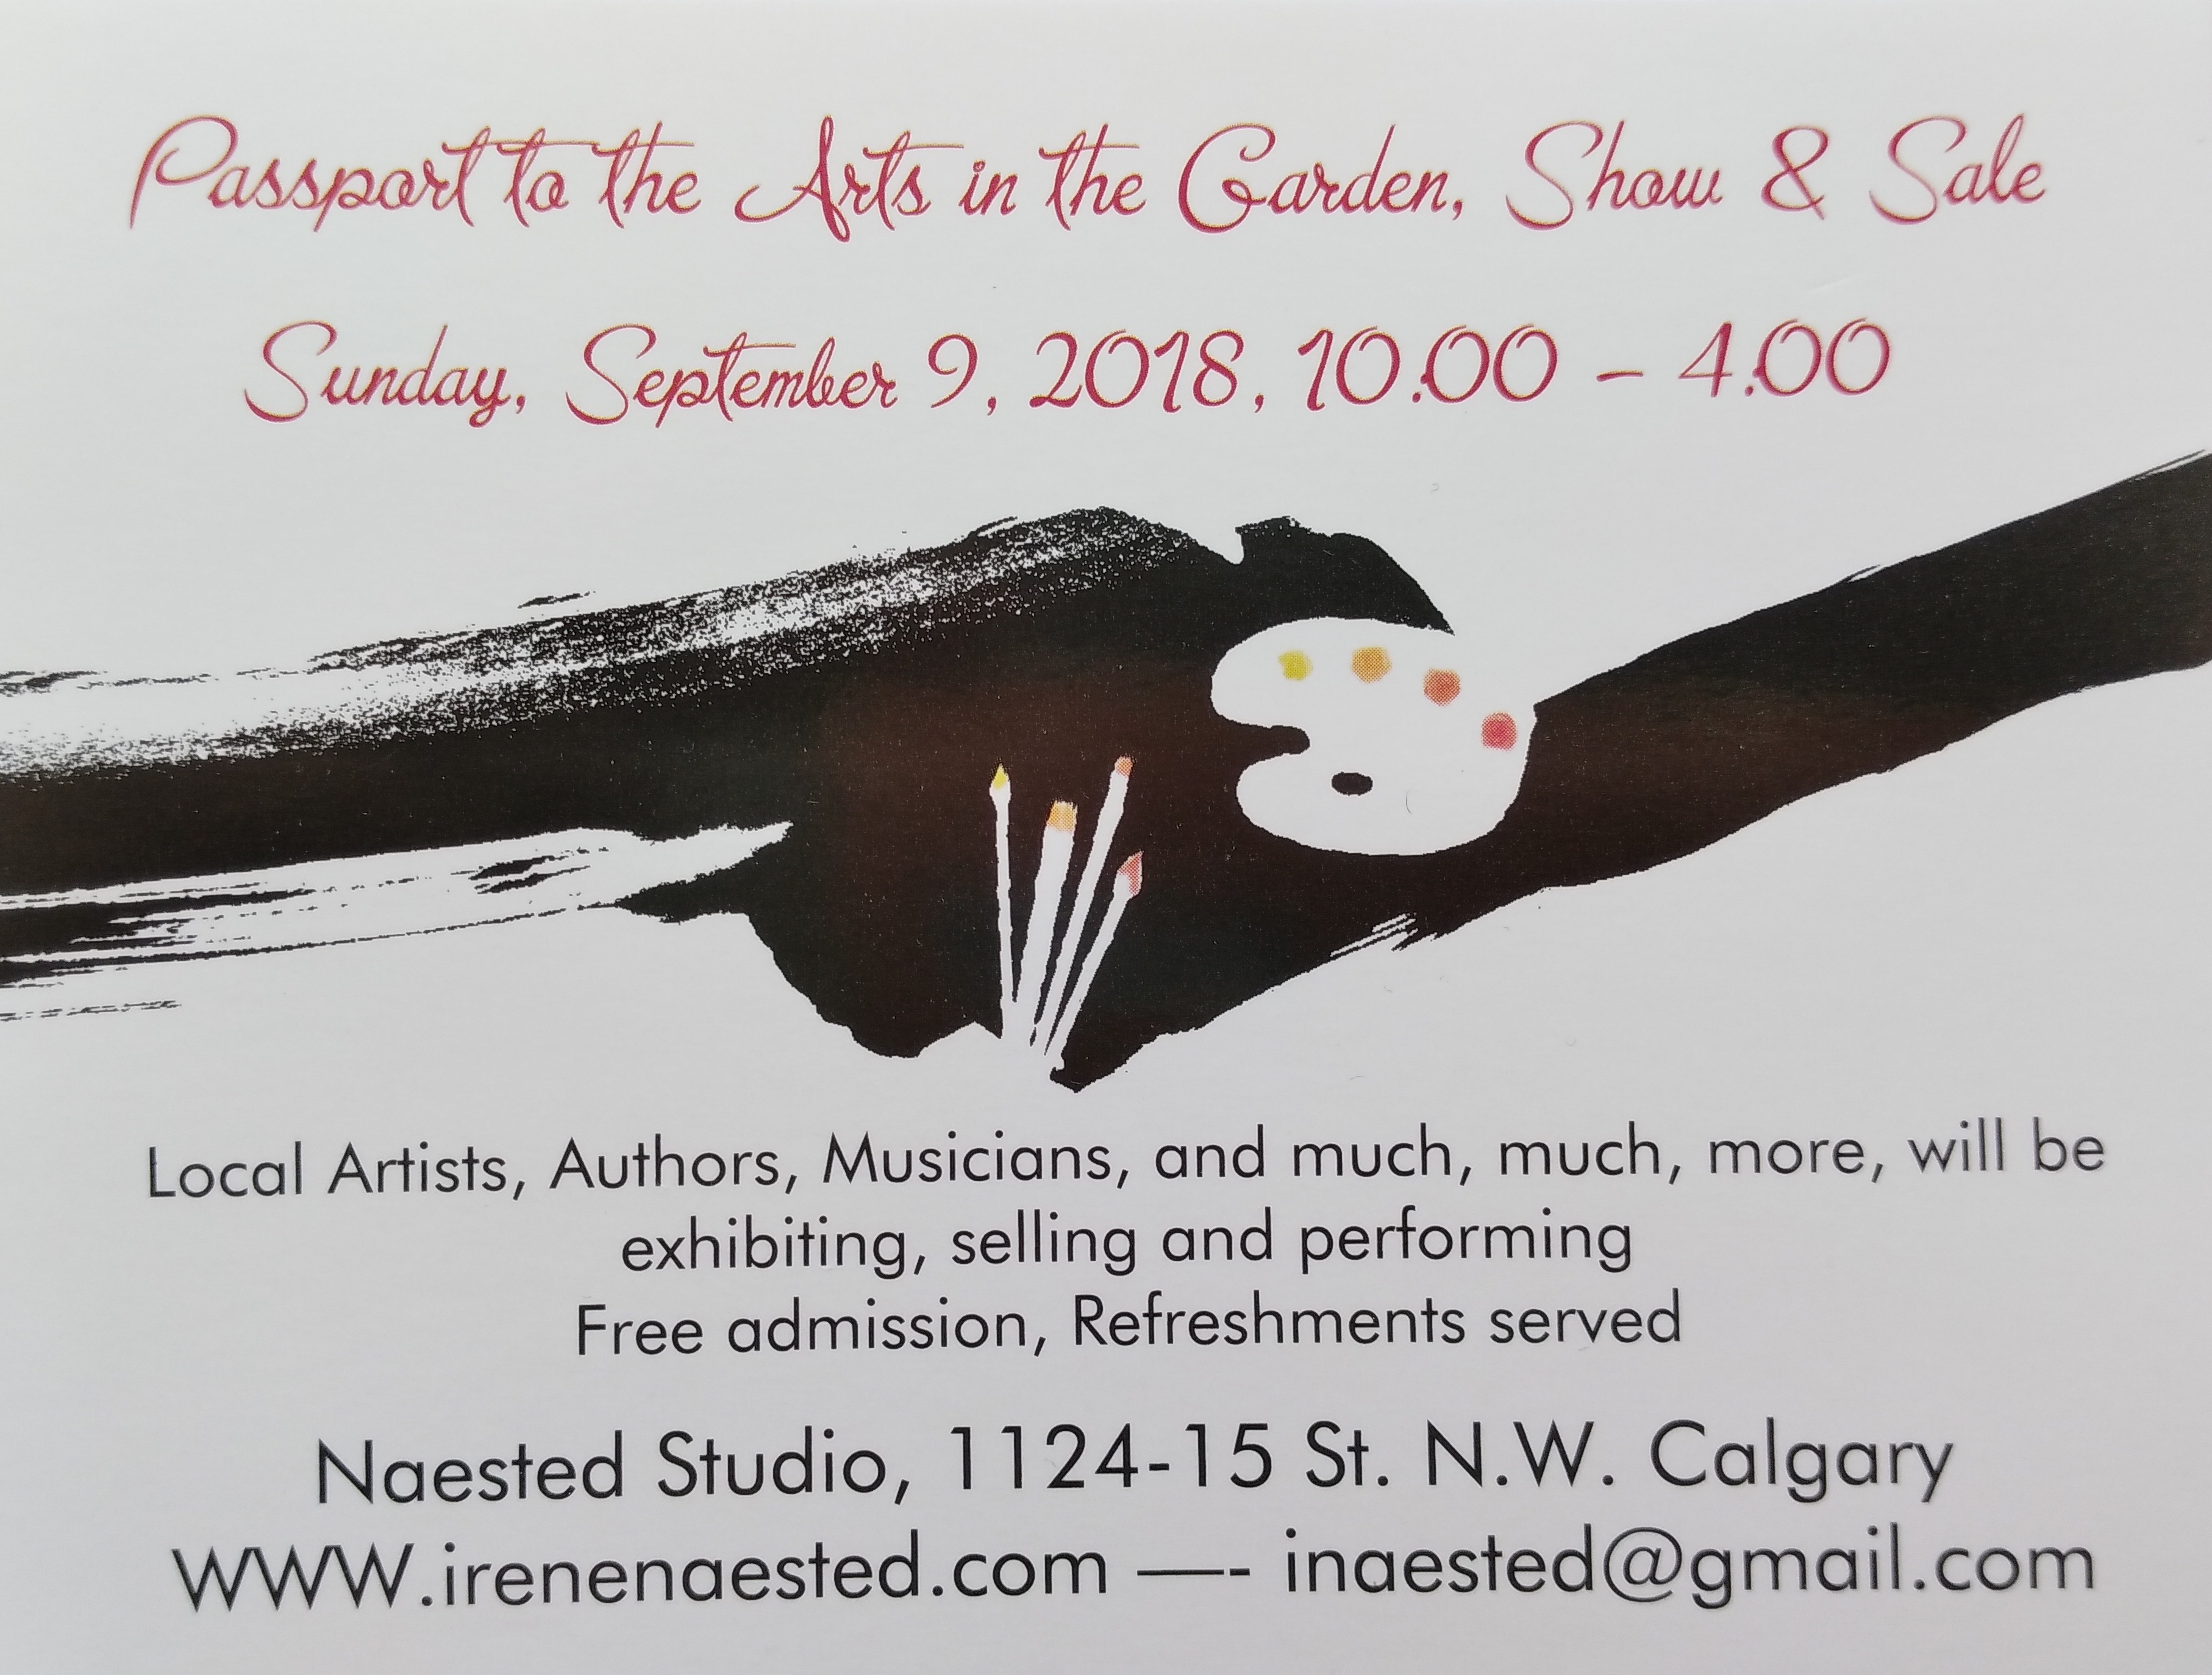 Passport to the Arts in the Garden Show & Sale, Sunday, Sept. 9, 2018